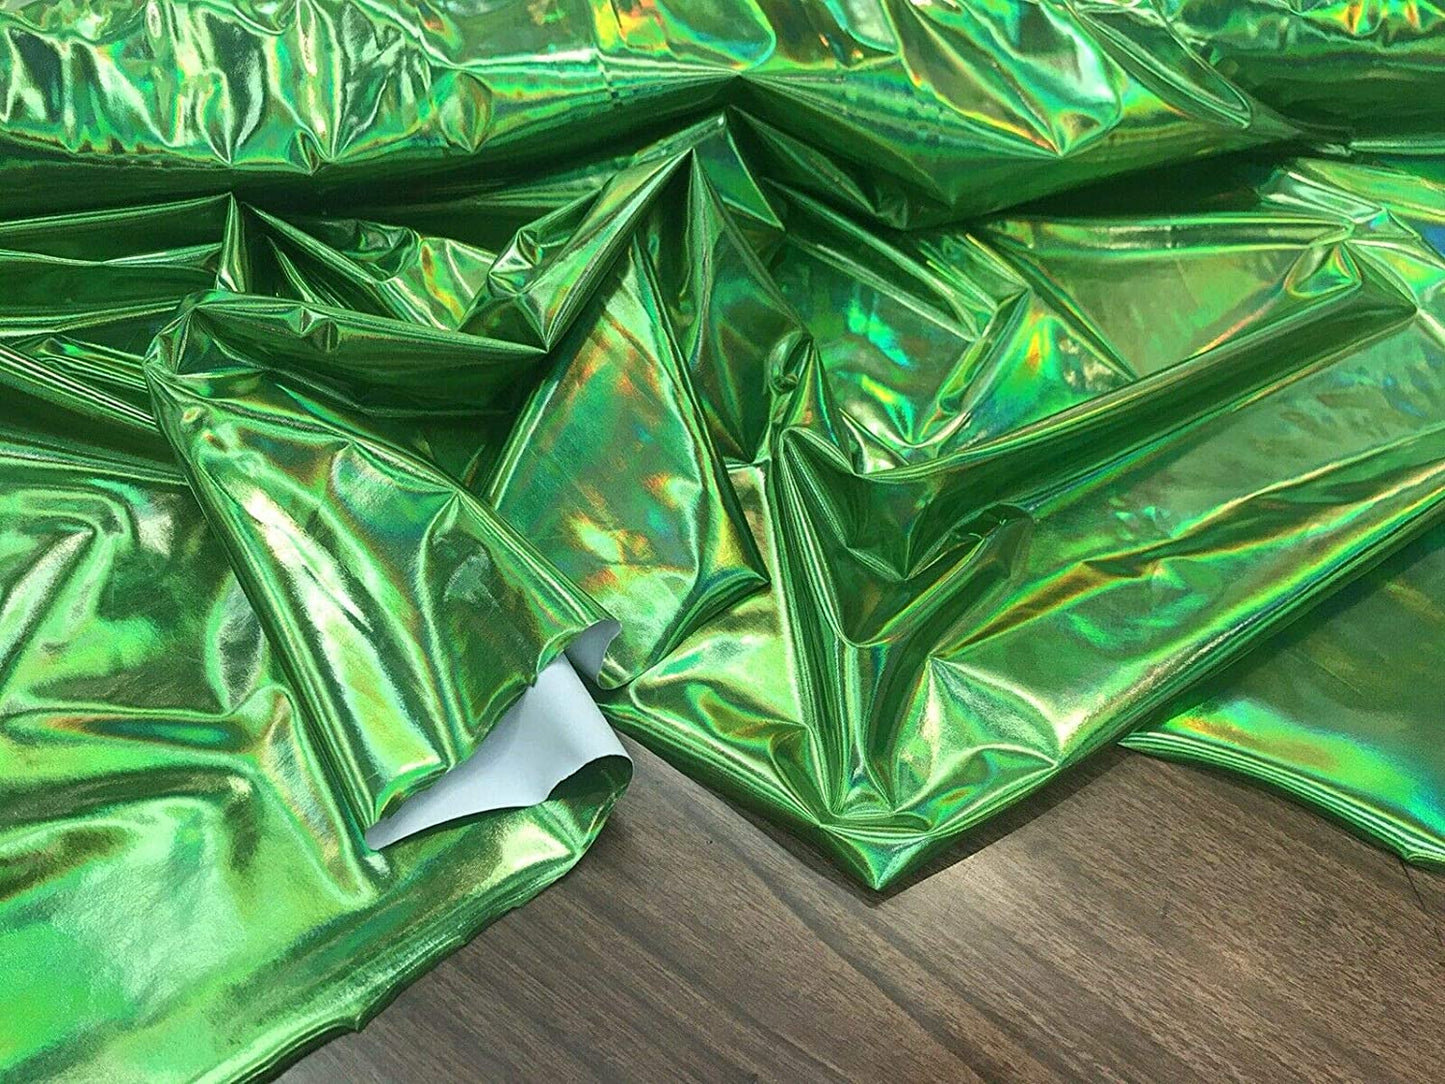 54" Wide Faux Leather Vinyl 4 Way Stretch Spandex Dance Wear Fabric by The Yard (Lime, REFRACTIVE Hologram)